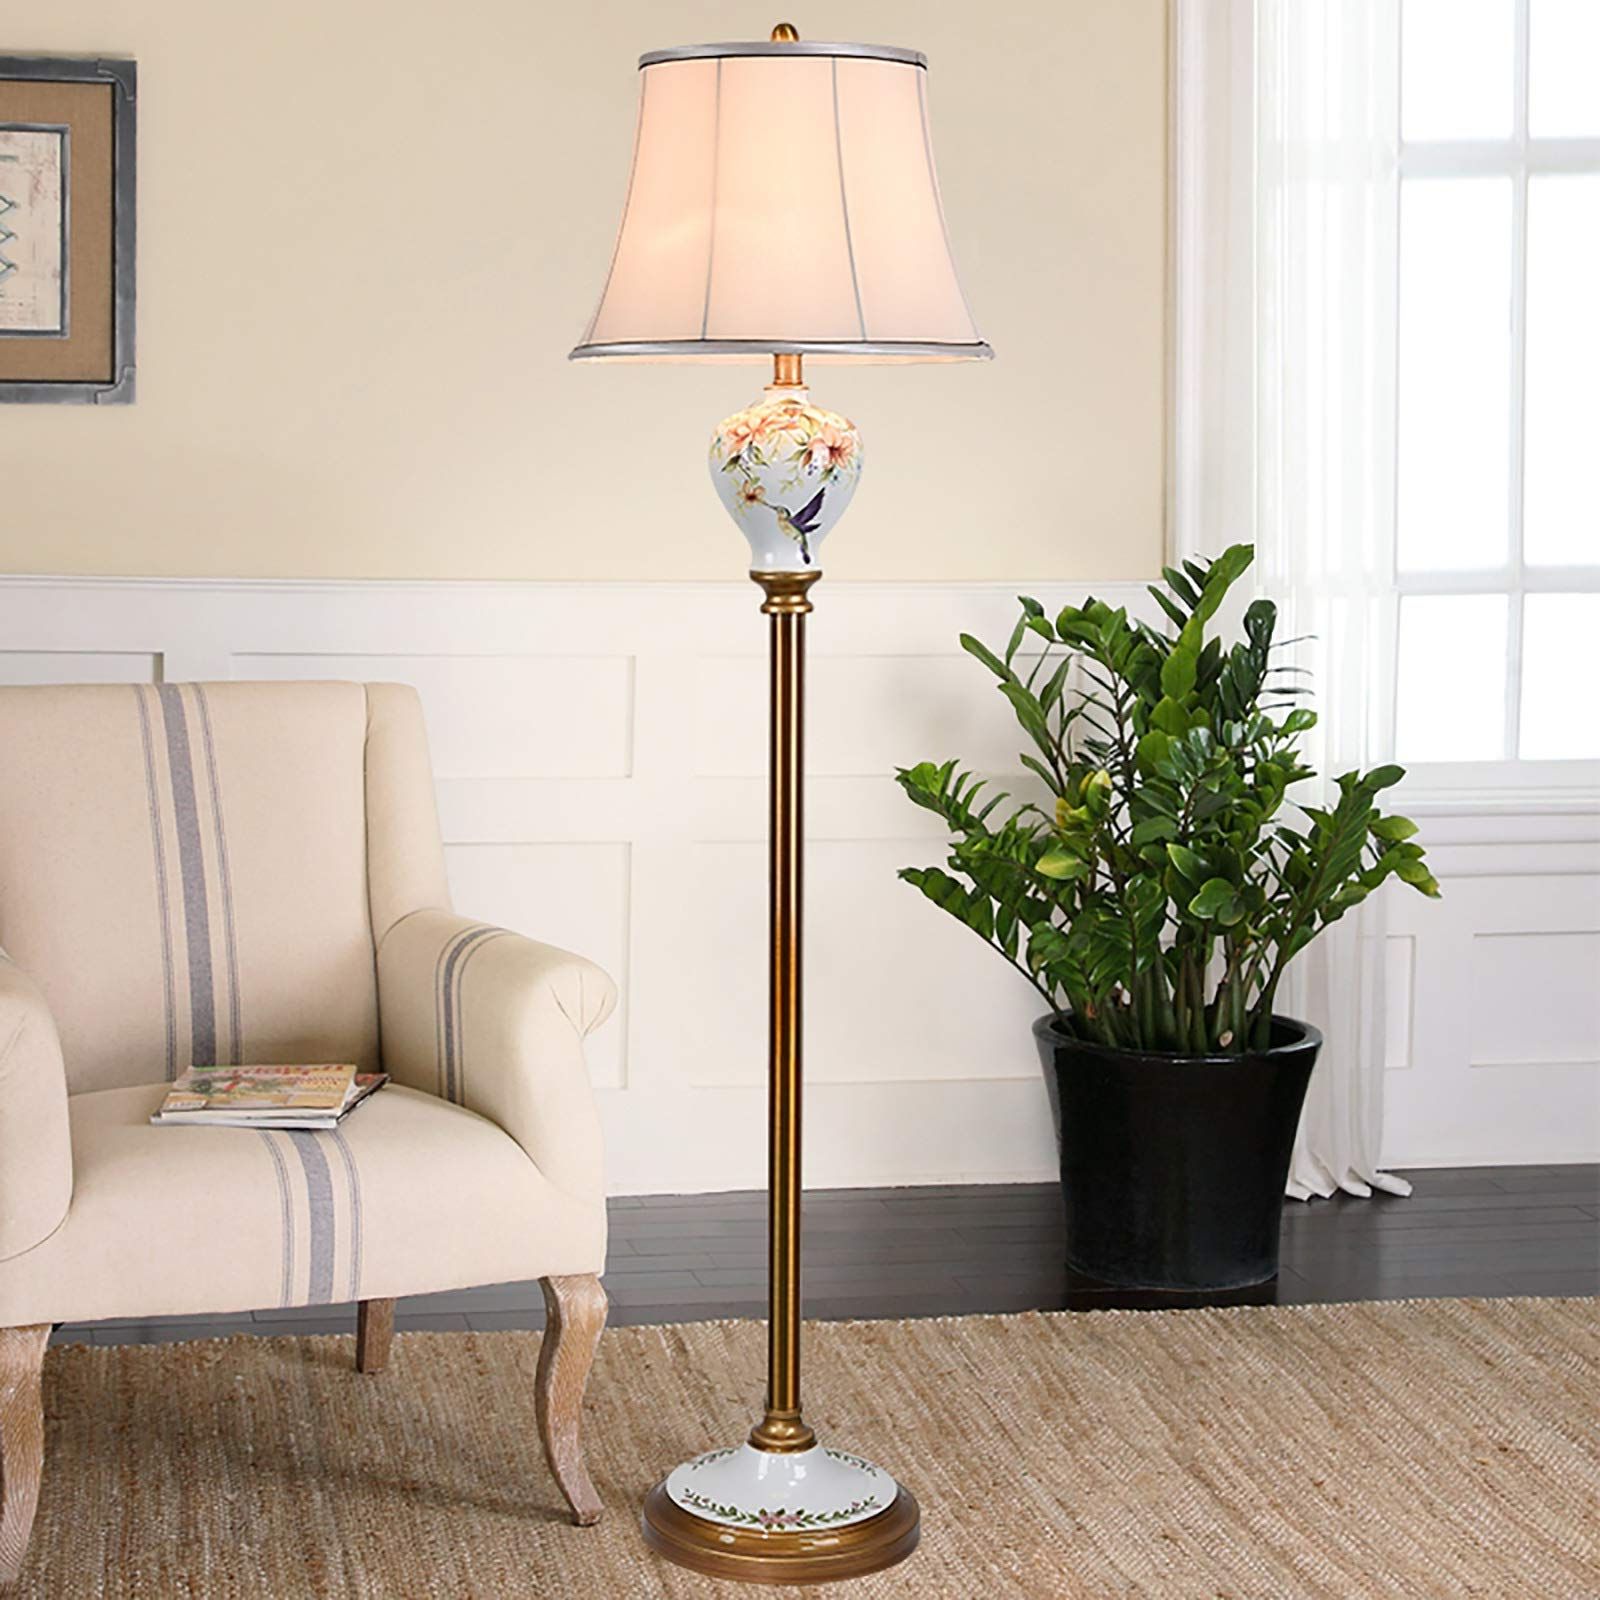 Most Popular Traditional Standing Lamps For Traditional Floor Lamp, Floor Light With Ceramic Hand Painted Center  Pillar,  (View 2 of 15)